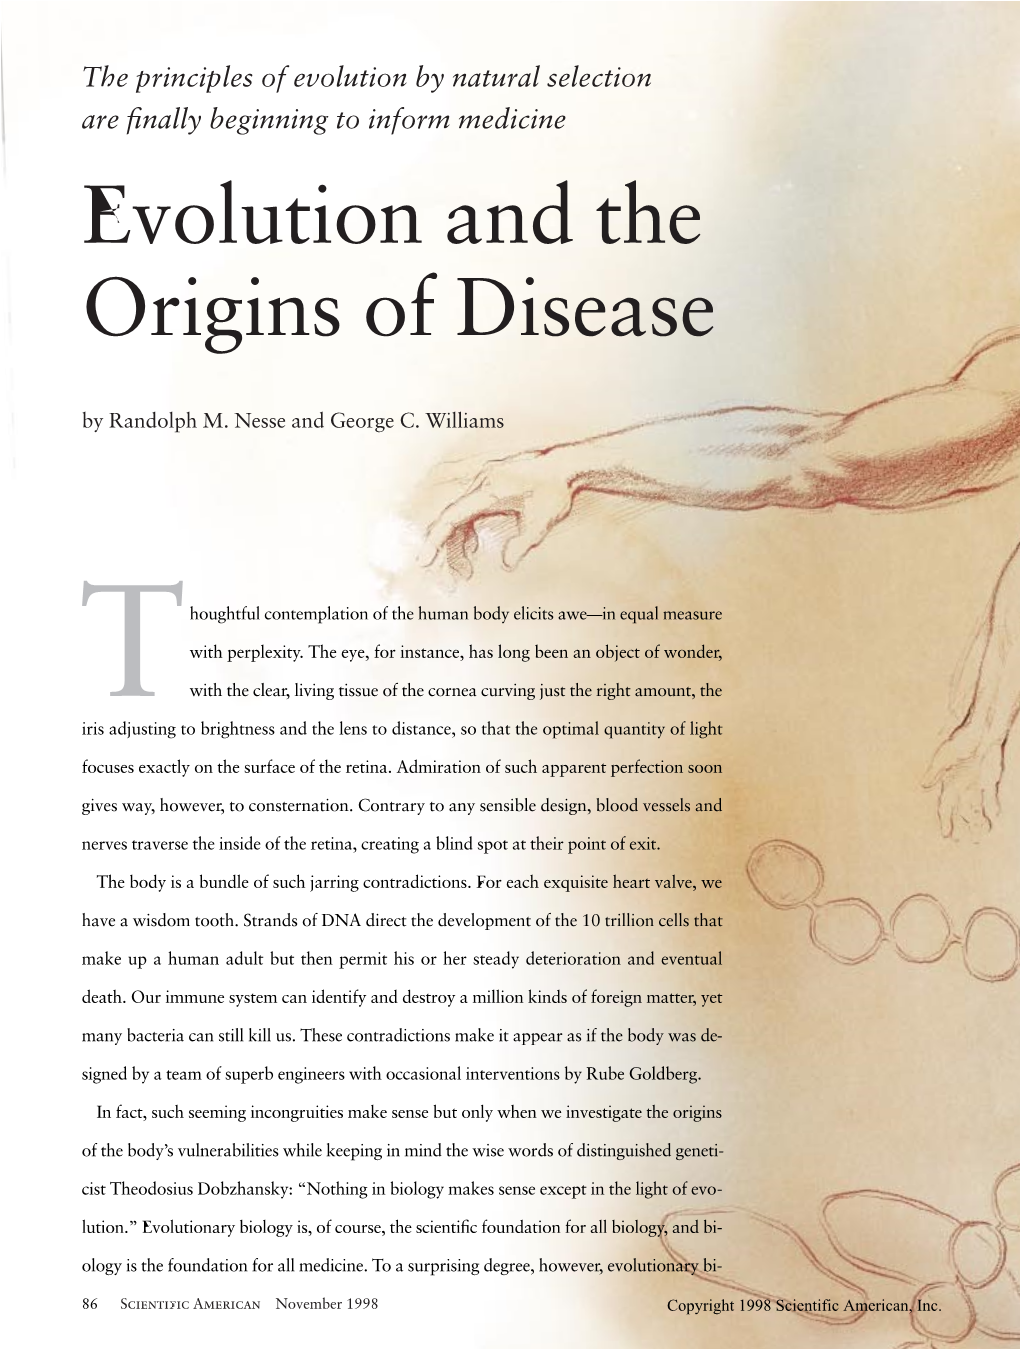 Evolution and the Origins of Disease by Randolph M